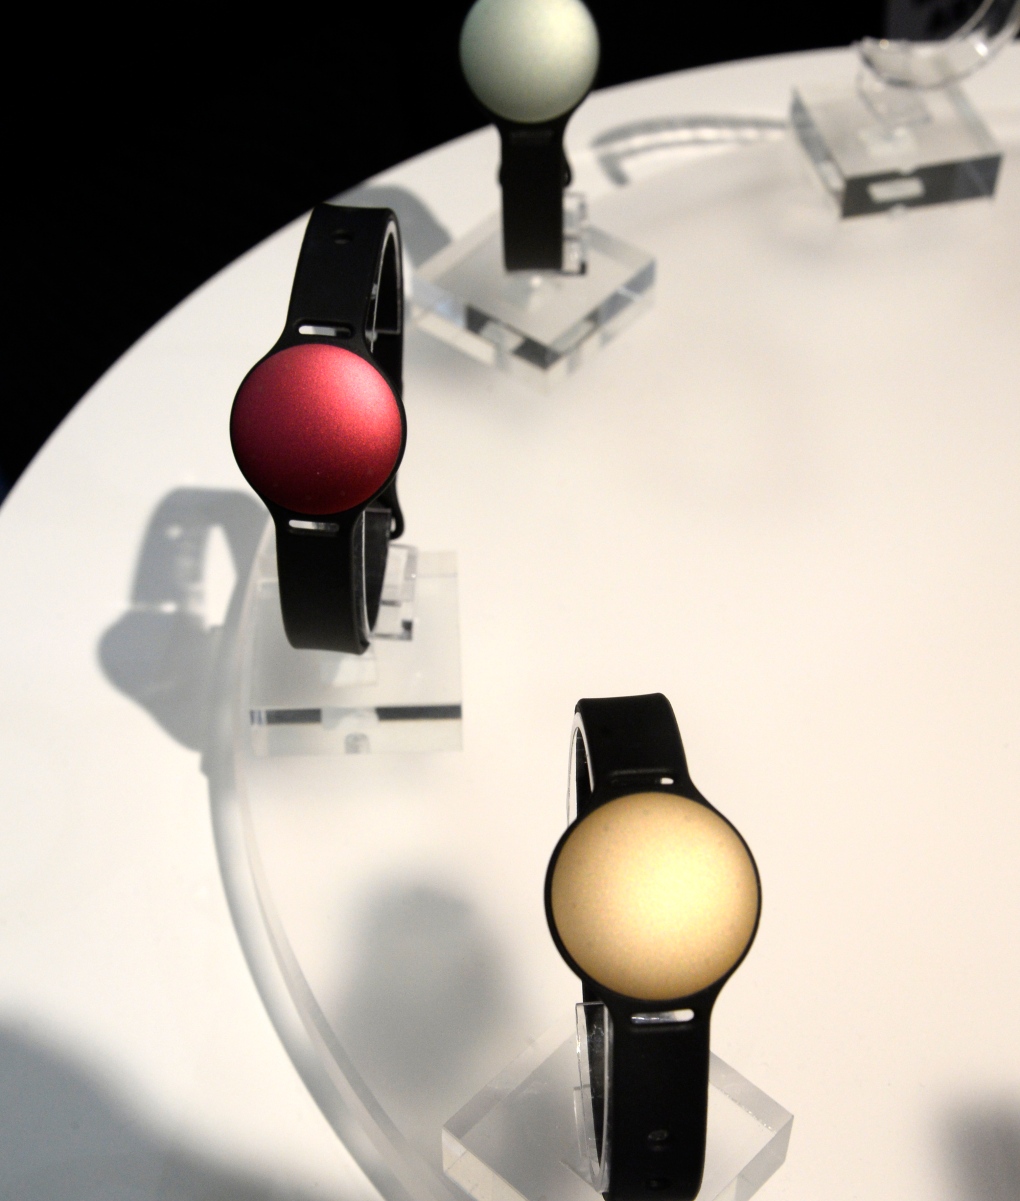 Shine physical activity monitor by Misfit